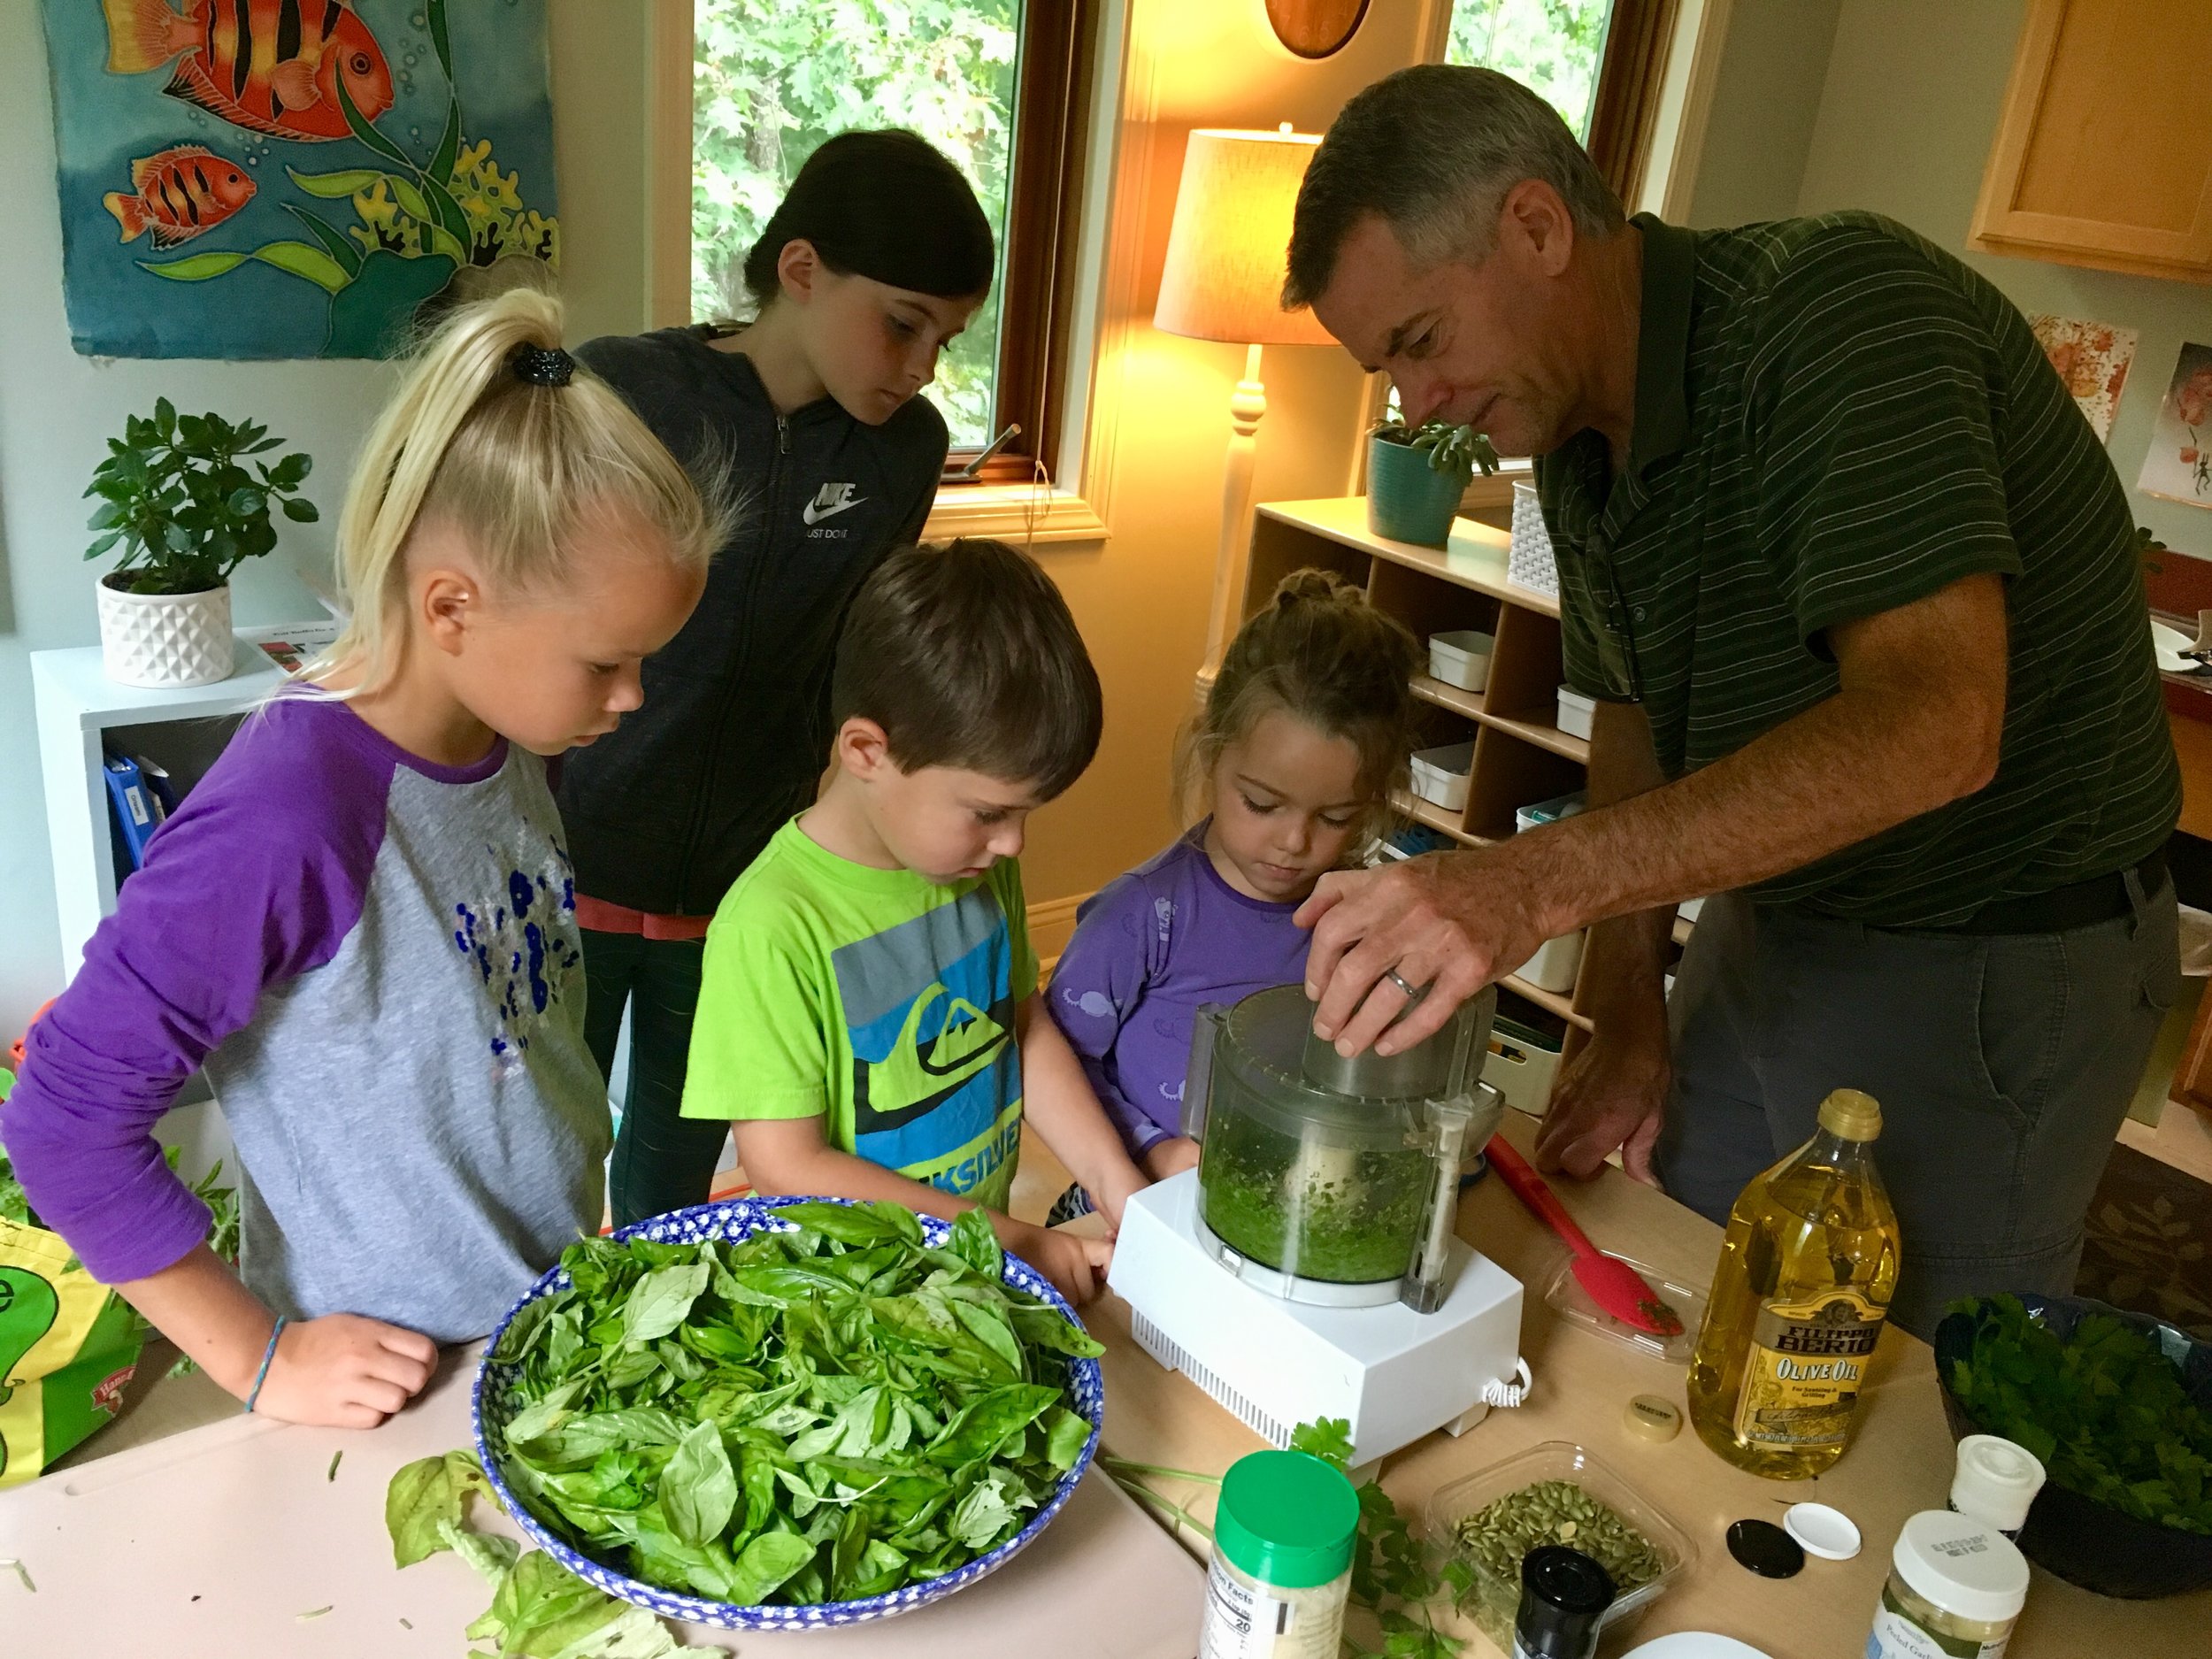  Upper elementary students work with primary students along with Michael to make pesto with basil harvested from our garden.  Pumpkin seeds replaced the nuts to make it nut free.  The smell of basil filled the air! 